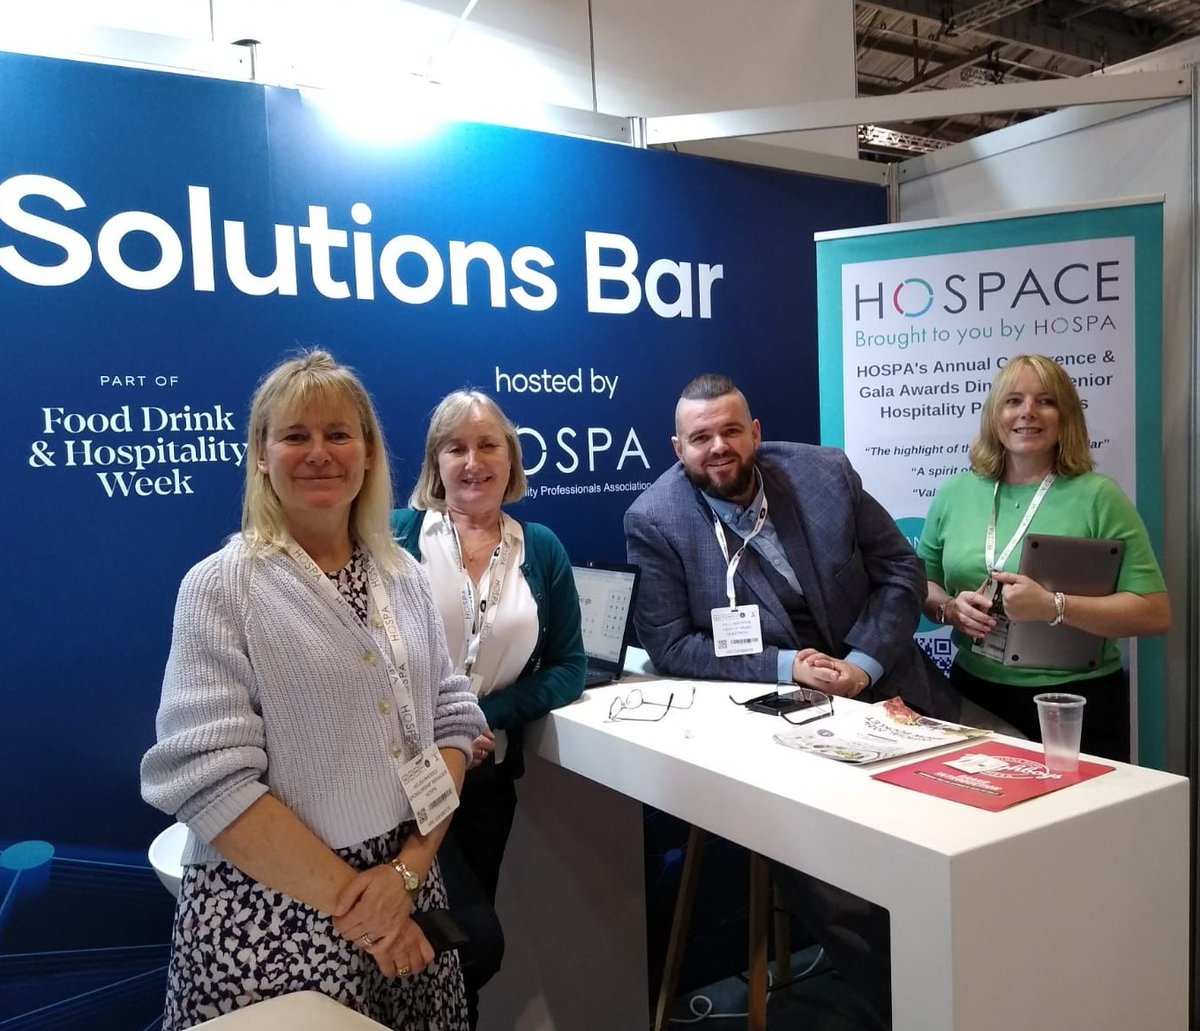 Running into familiar faces at #HRCLondon! Caught up with Helen Rhodes at @HRC_Event, along with Helen Marshall and Amanda Brown from @HOSPAtweets. Check out the event schedule and join us: hubs.ly/Q02qSVQg0 #GuestRevuOnTheGo #GuestRevu #HOSPA #HRC24